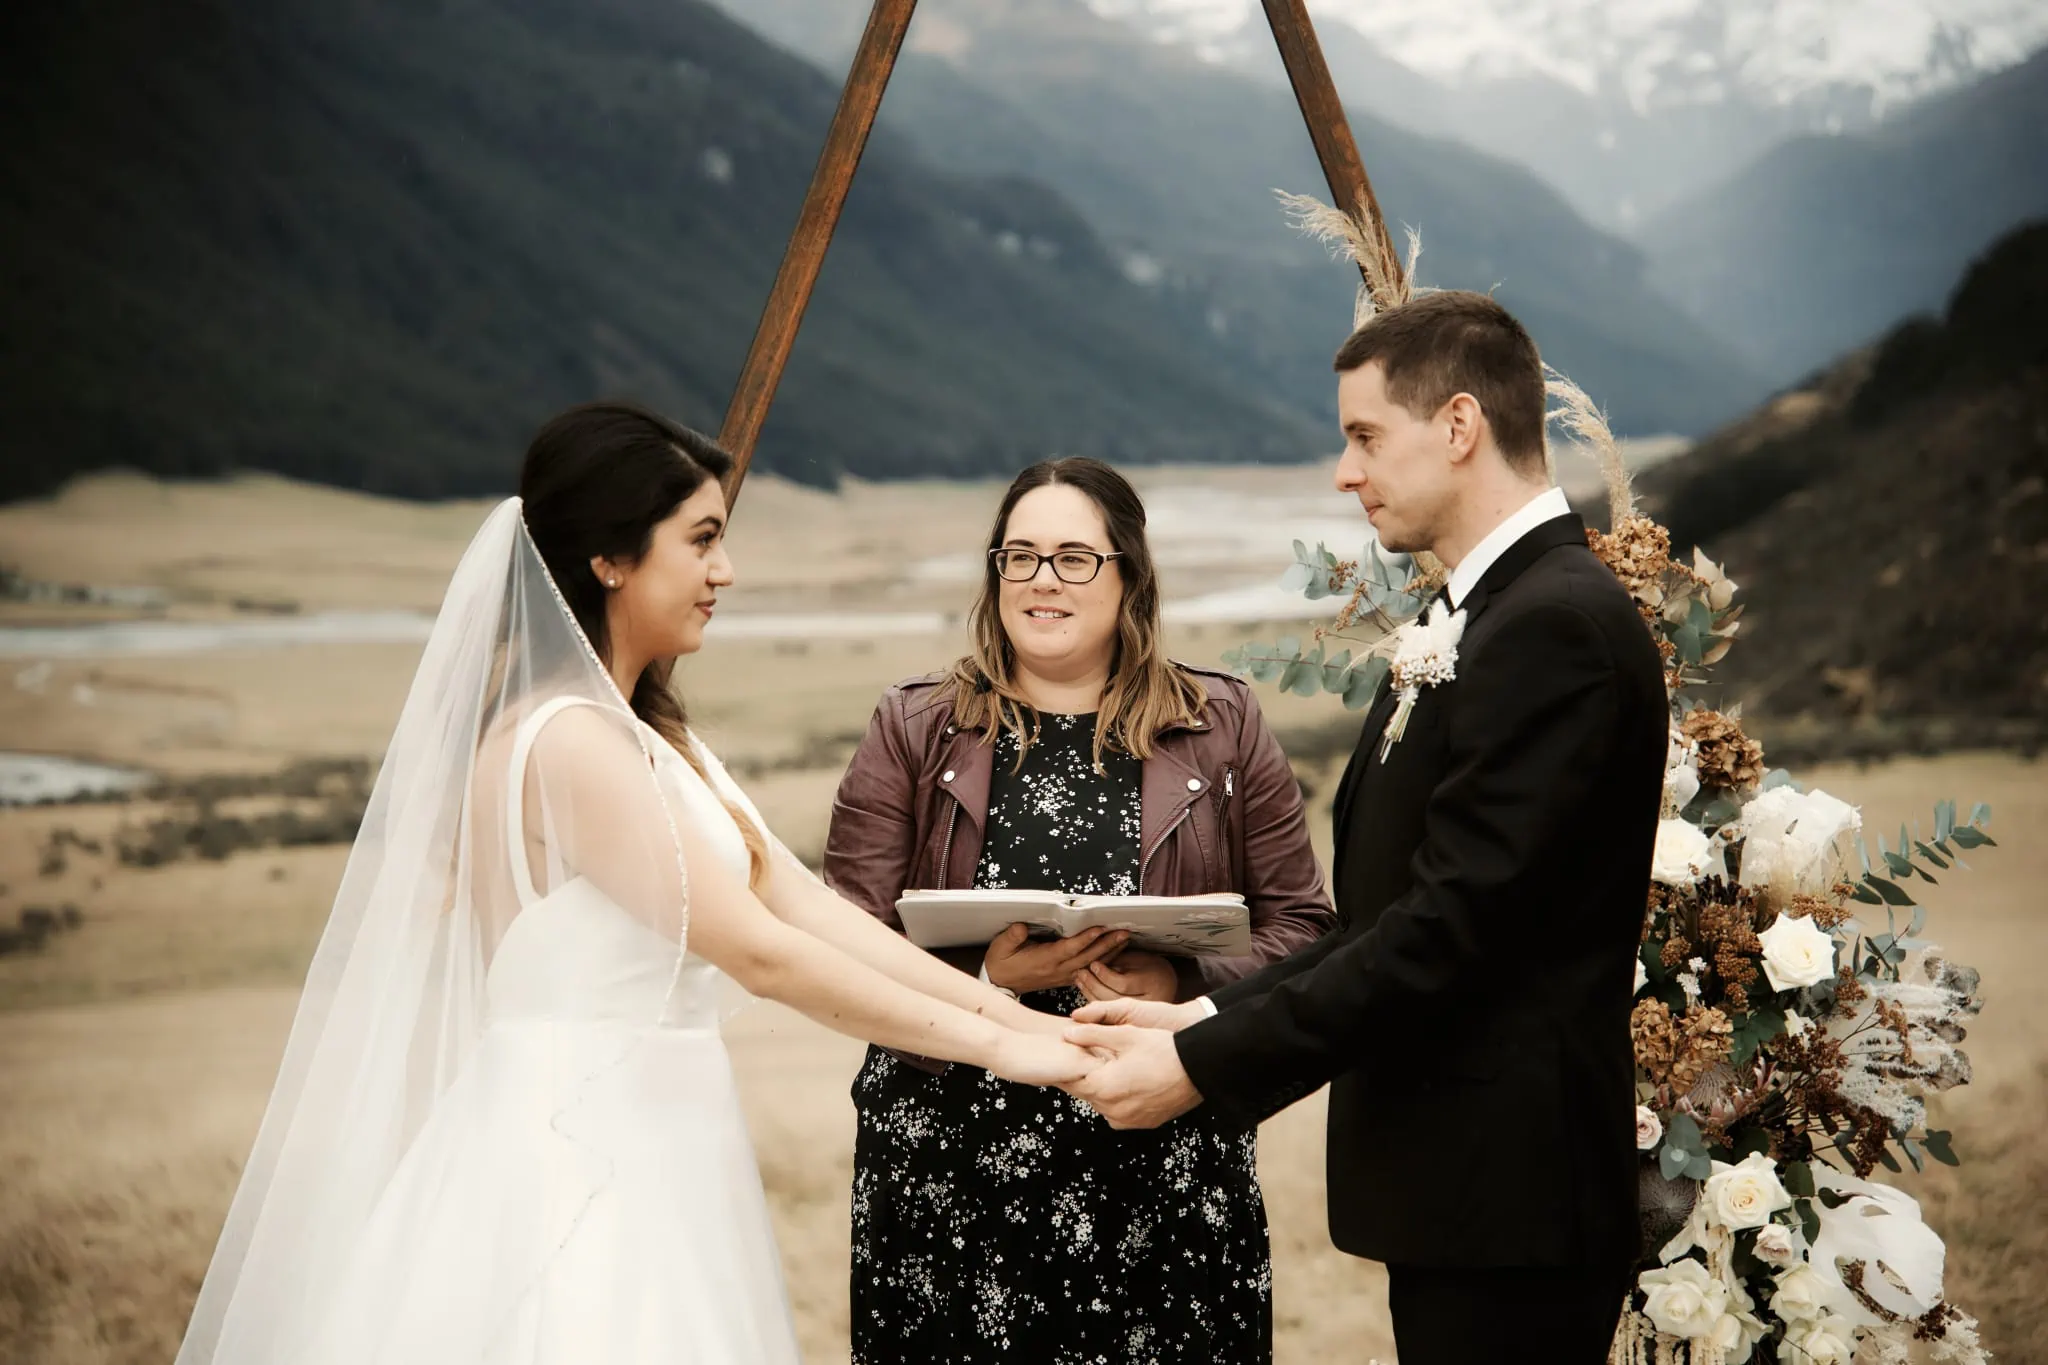 Michelle and Vedran have a beautiful Rees Valley Station elopement wedding, exchanging vows in front of majestic mountains.